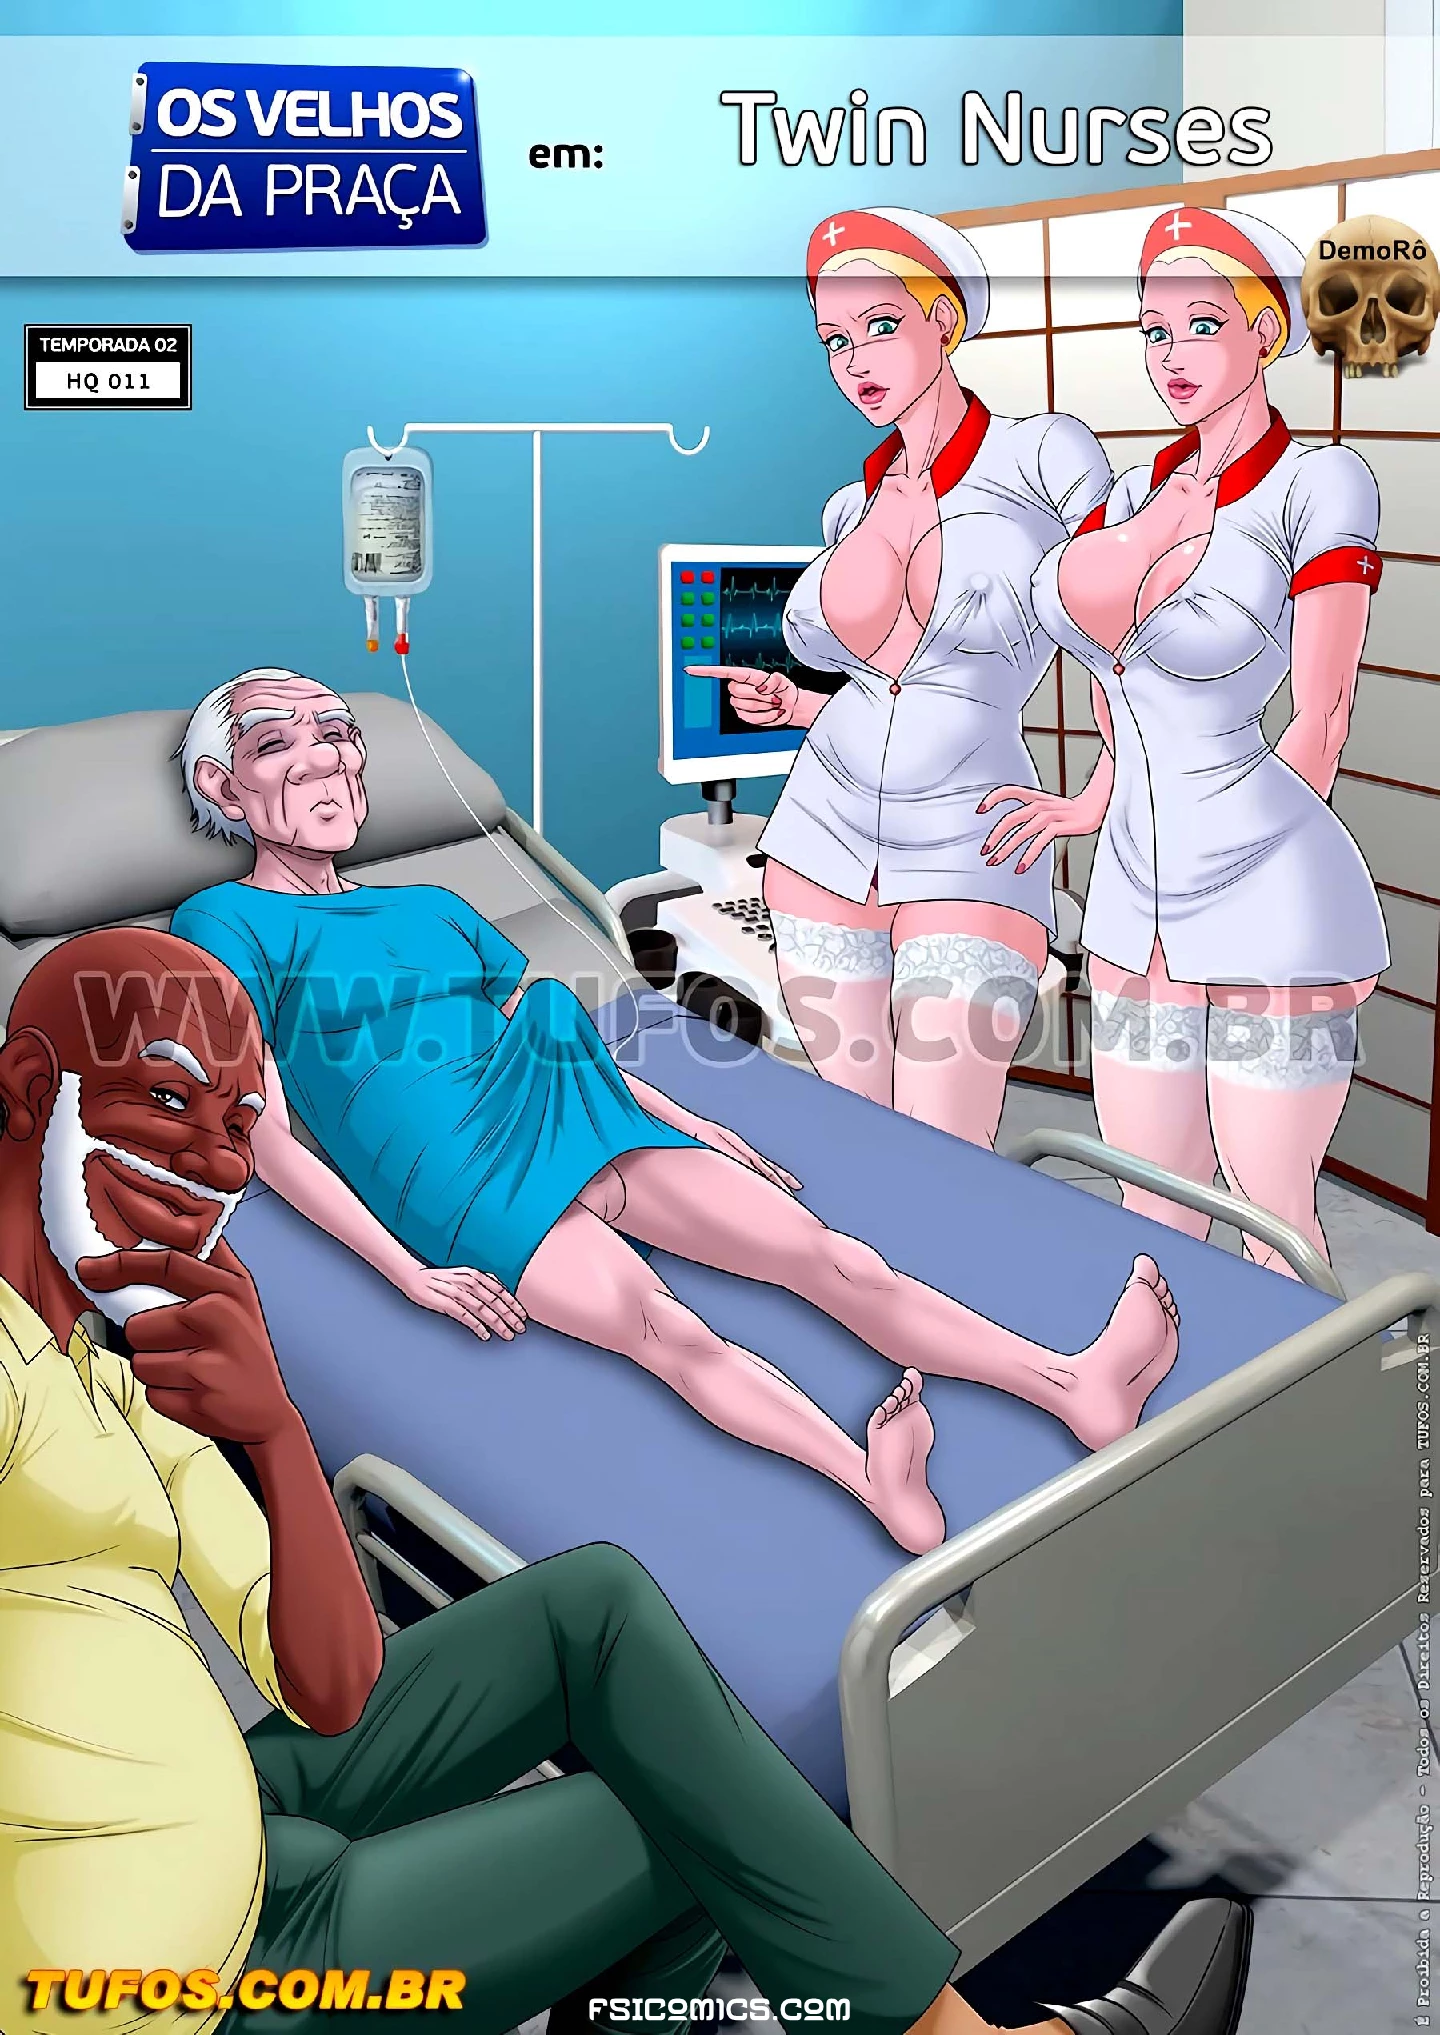 Old Geezers Of The Park Chapter 11 – Twin Nurses – Wc Tf - 63 - Fsicomics